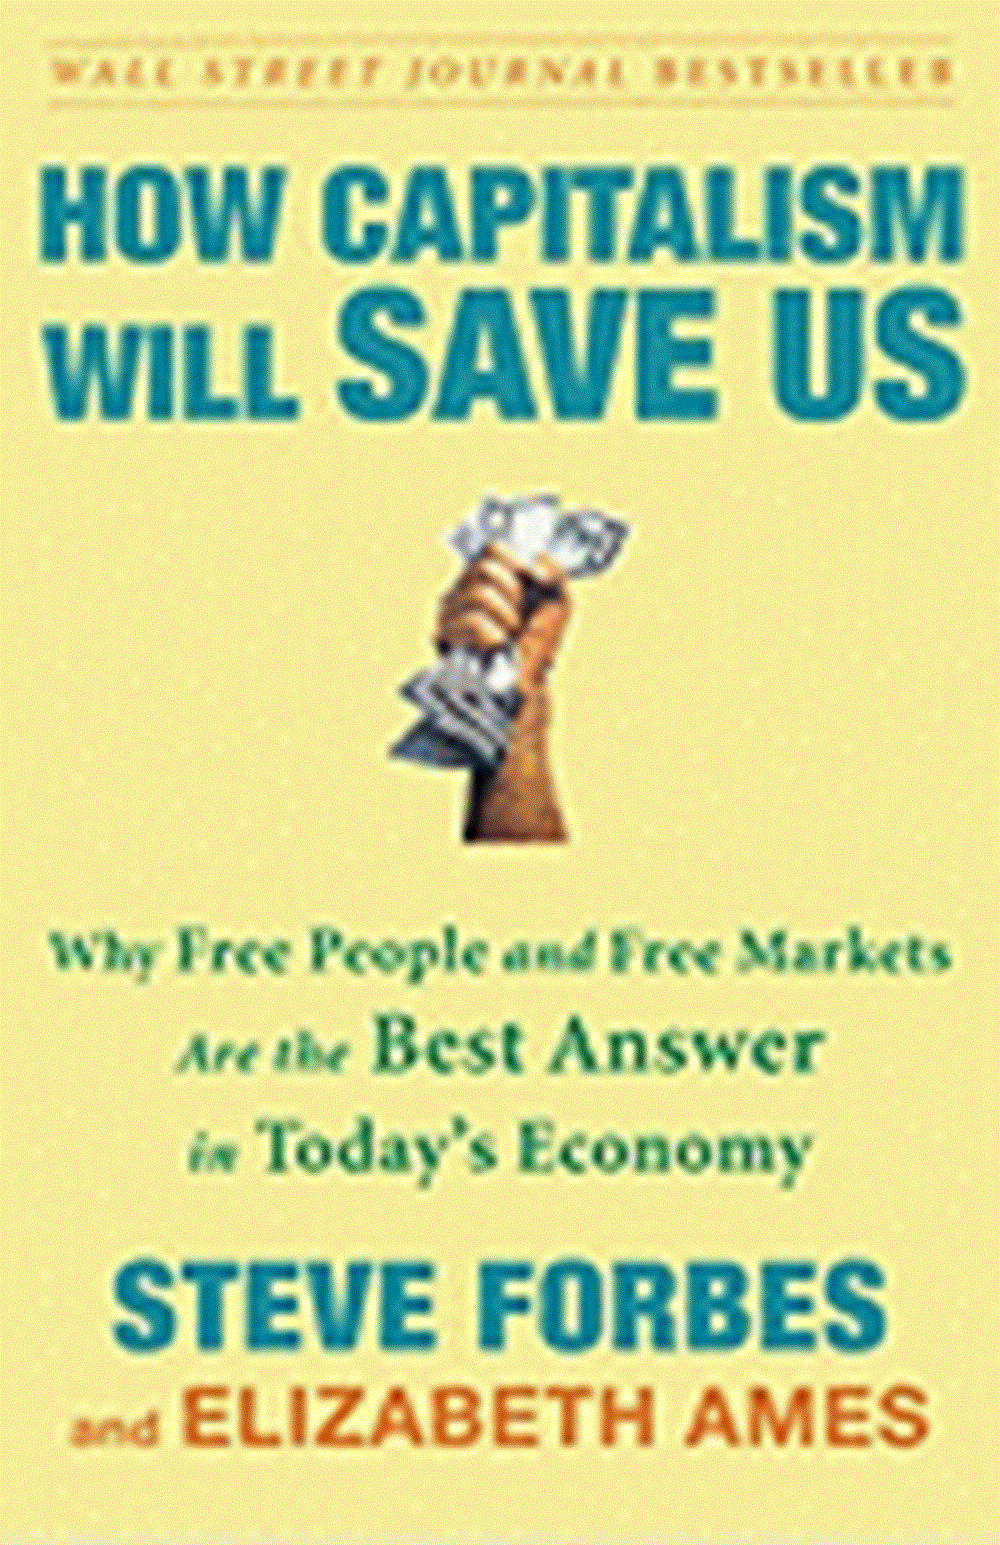 How Capitalism Will Save Us Why Free People and Free Markets Are the Best Answer in Today's Economy 